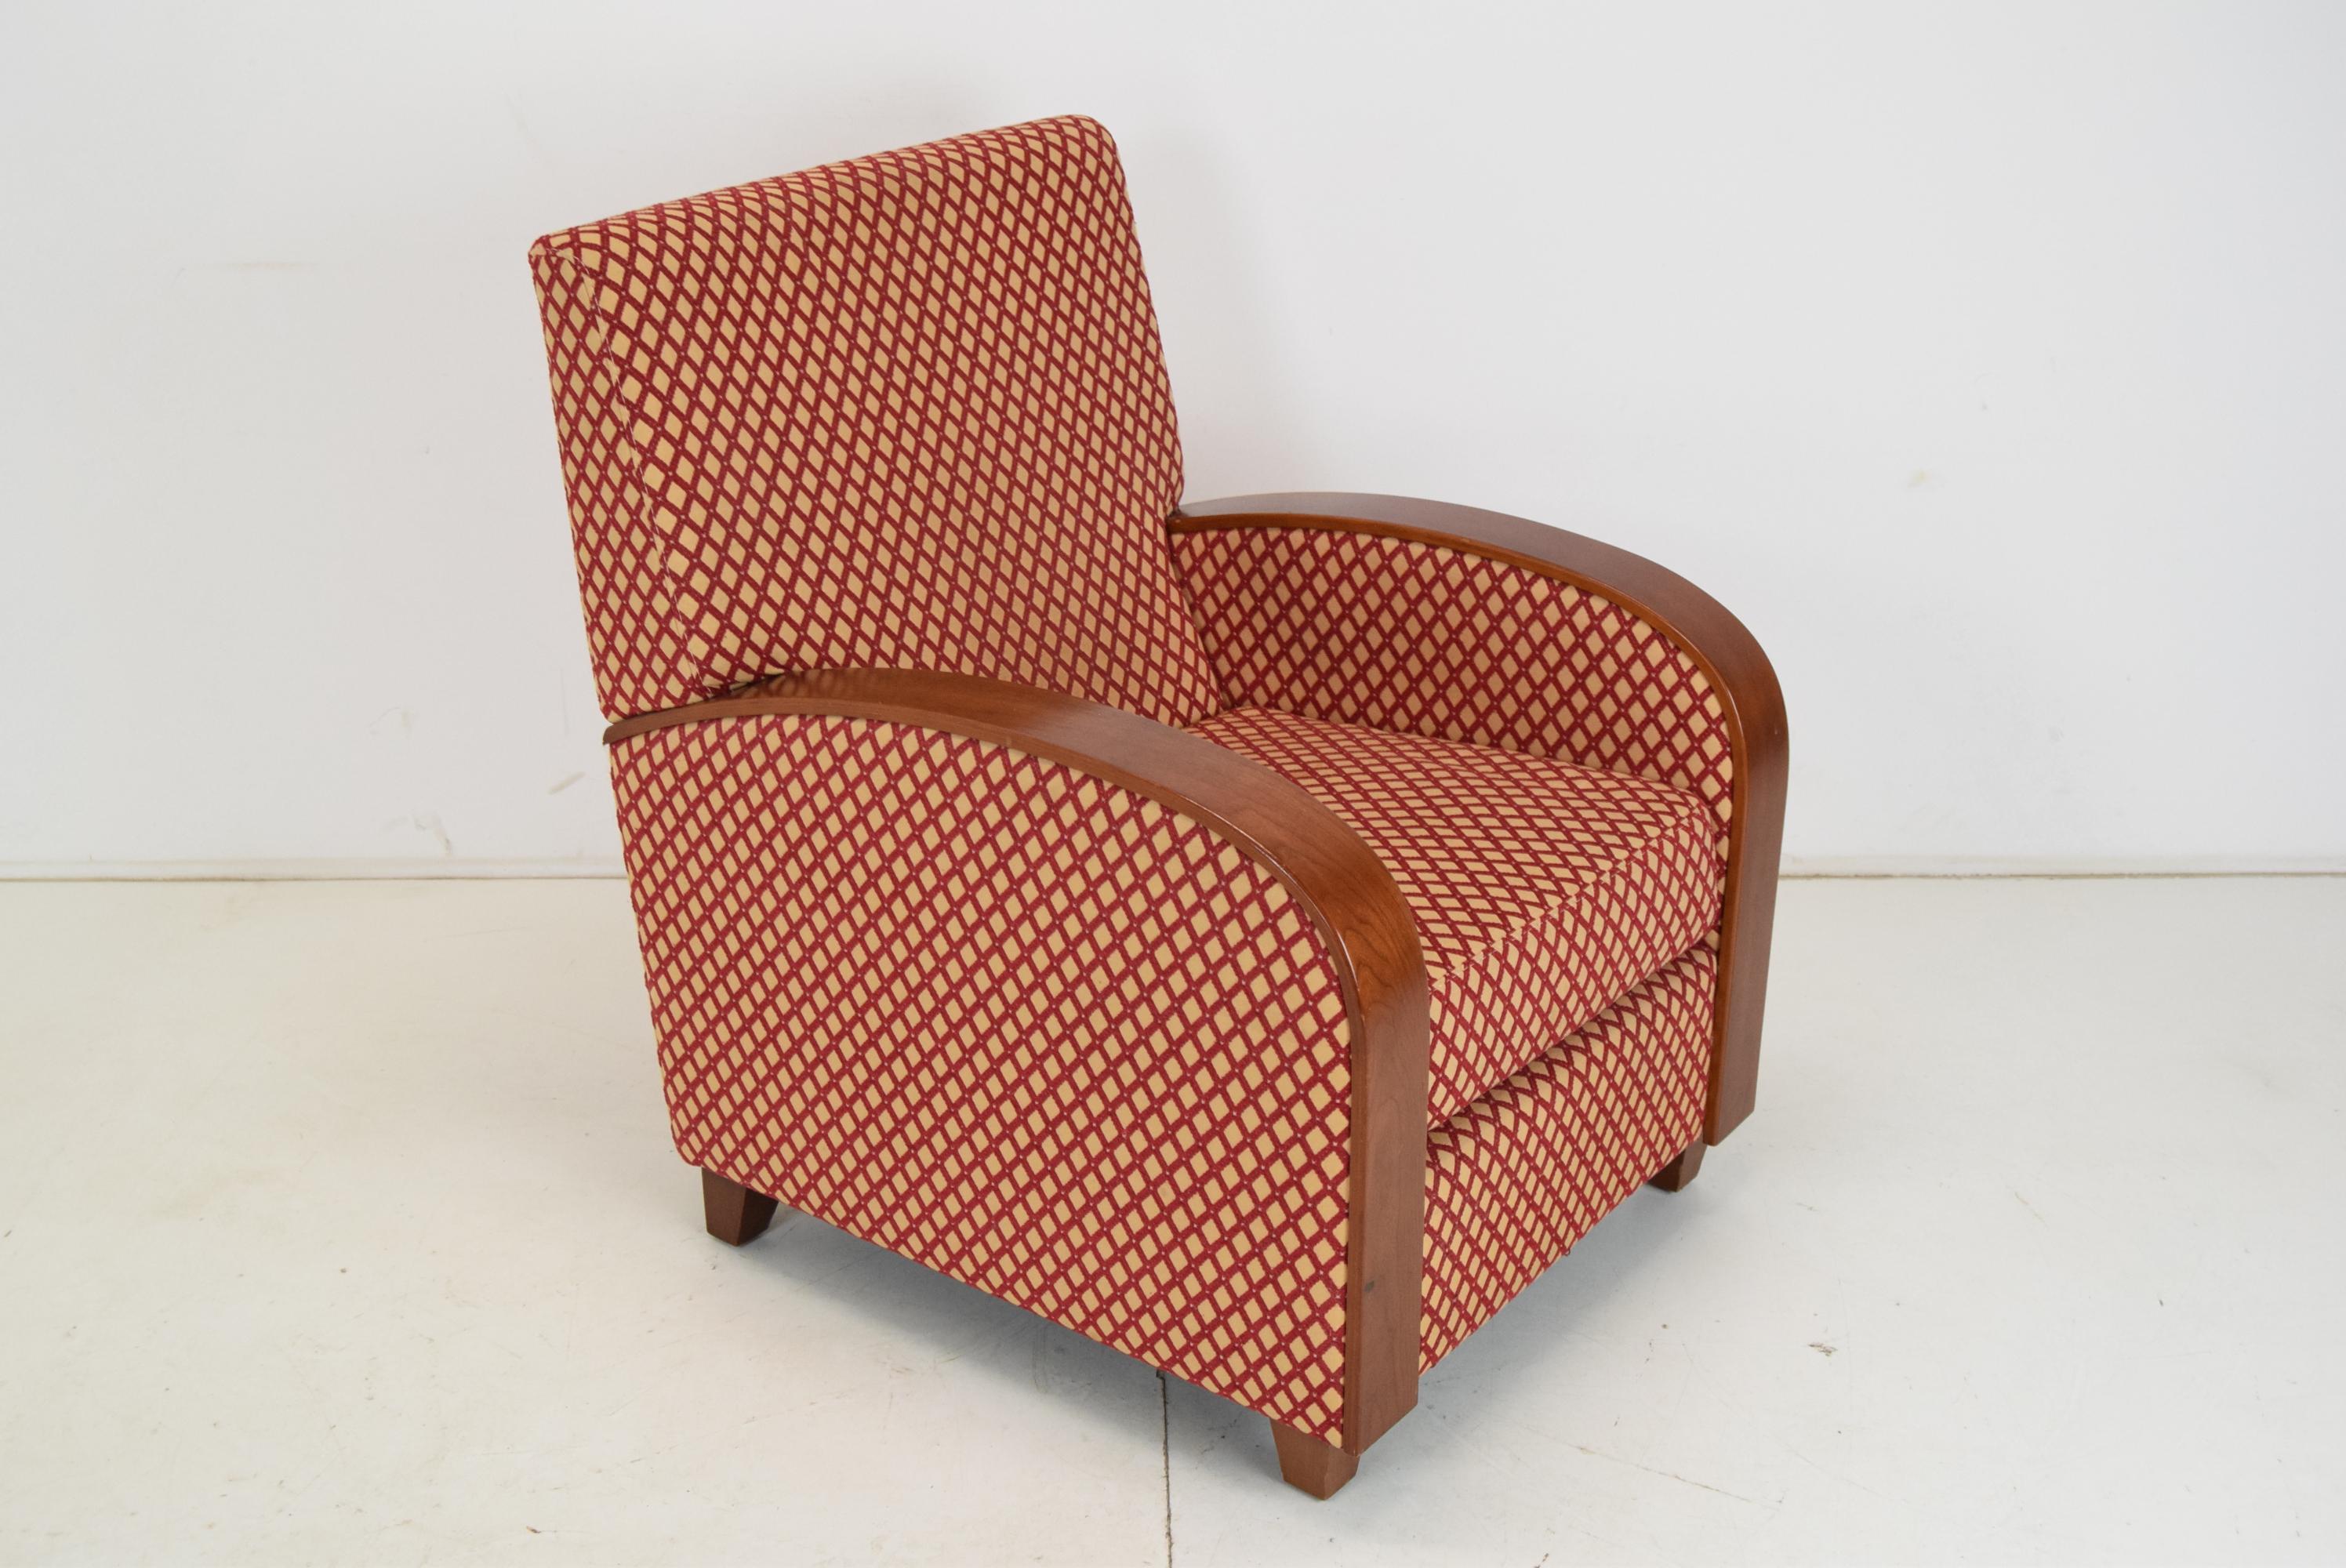 Made in Czechoslovakia
Made of Fabric,Wood
Two pieces in stock
Design armchair in style art deco 
Good Original condition.
 